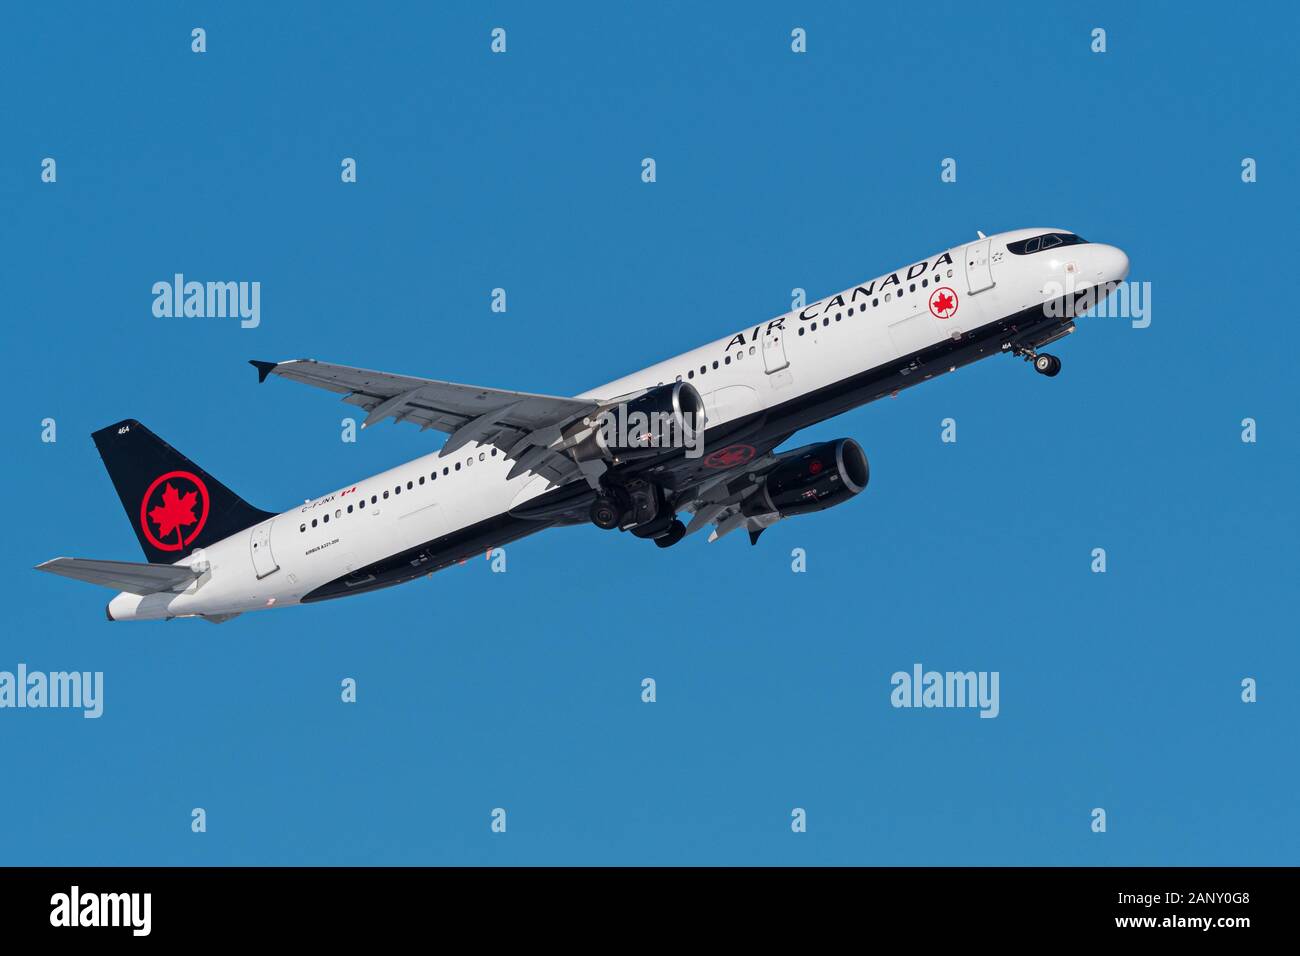 Air Canada plane Airbus A321 (A321-200) single-aisle narrow body jet airliner airborne after take-off Stock Photo